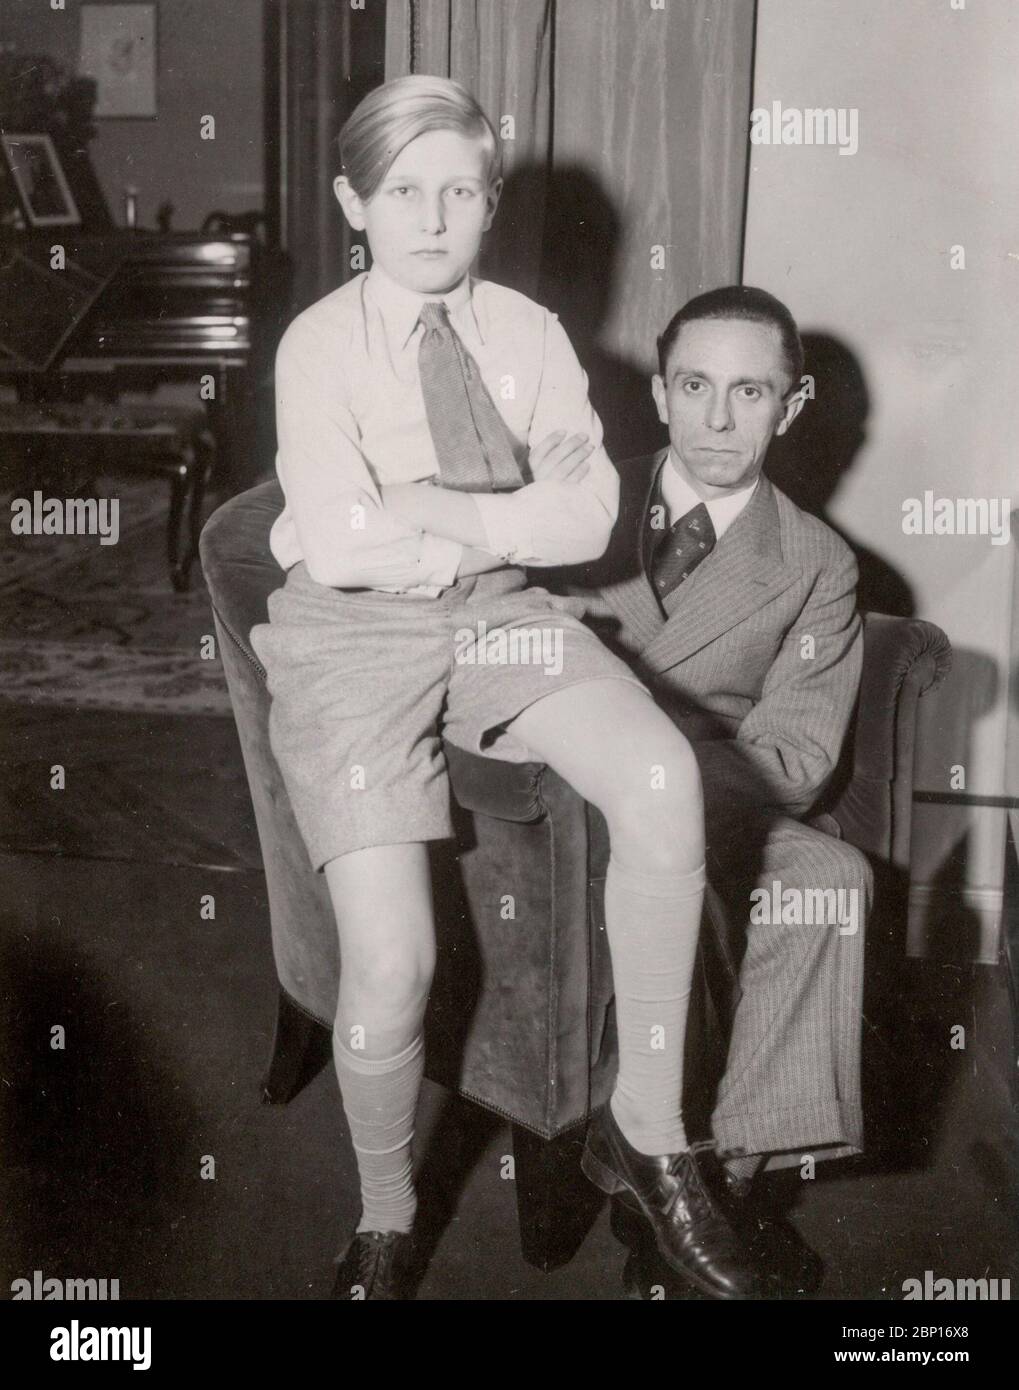 Joseph Goebbels, Heinrich Hoffmann Photographs 1933 Adolf Hitler's official photographer, and a Nazi politician and publisher, who was a member of Hitler's intimate circle.  Joseph Goebbels with his wife's son Harald Quandt  from her first marriage. Stock Photo